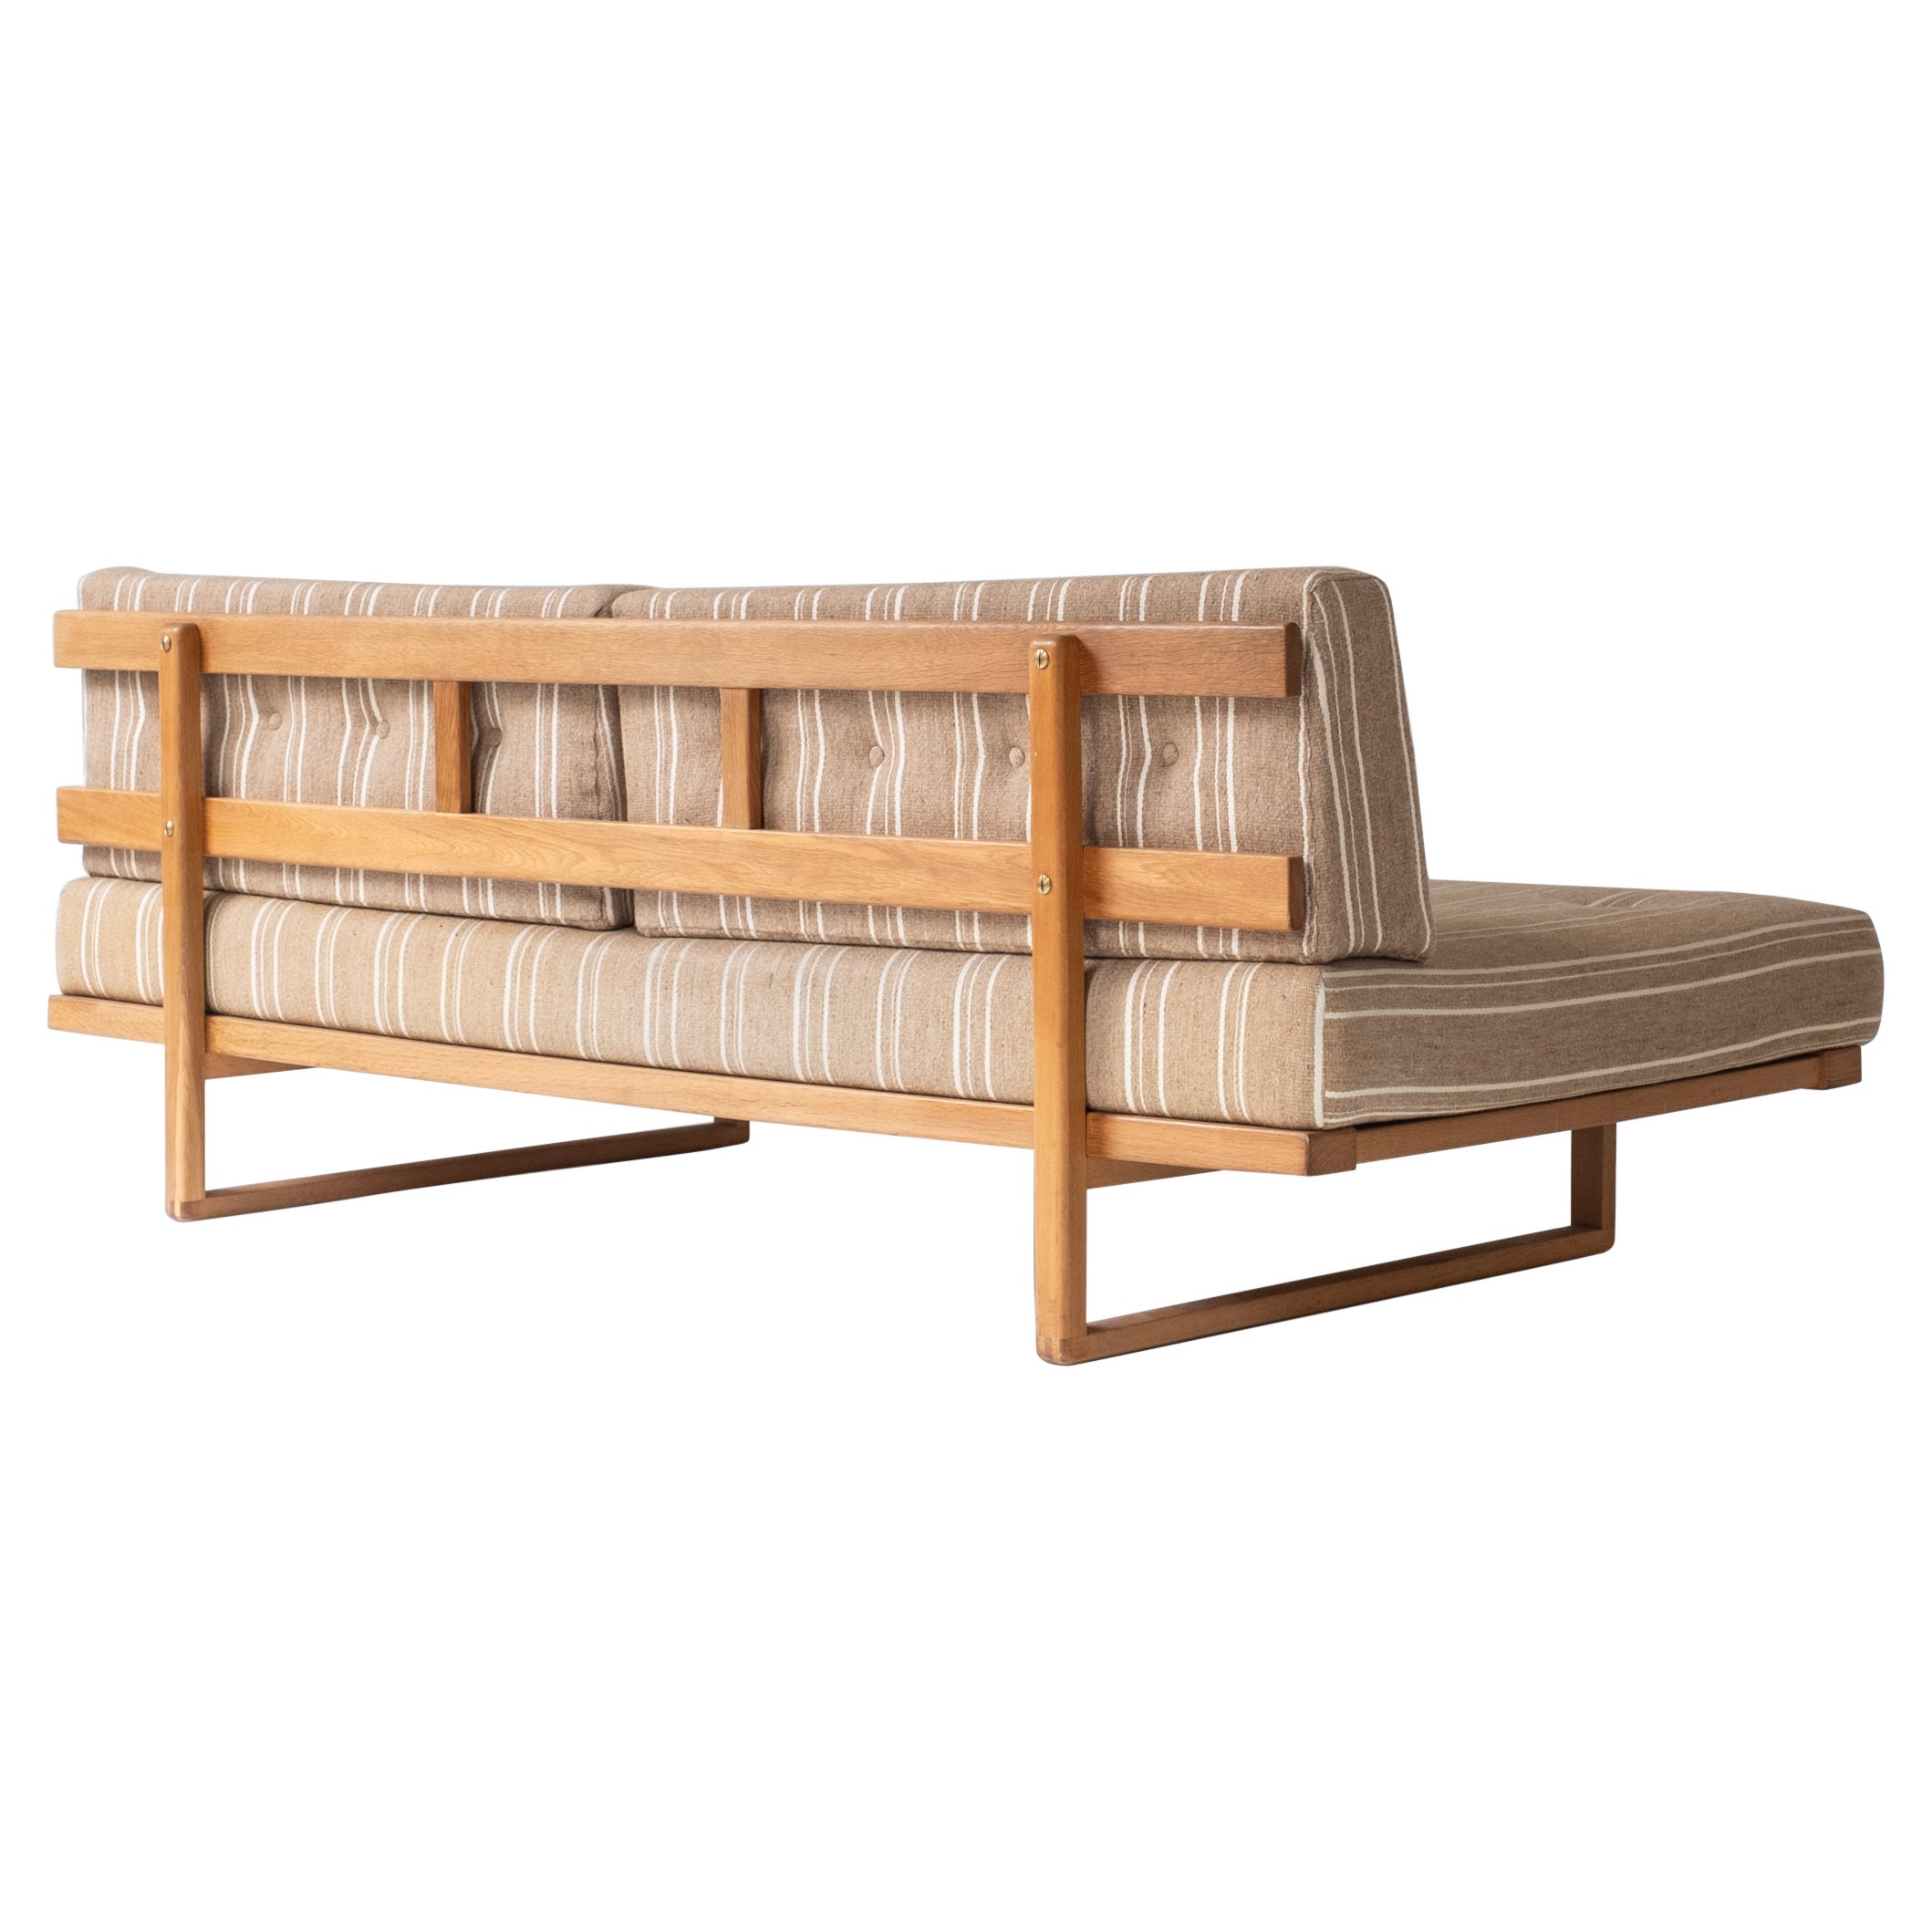 Sofa or daybed ‘Model No 4311’ by Børge Mogensen for Fredericia, Denmark 1950s. For Sale